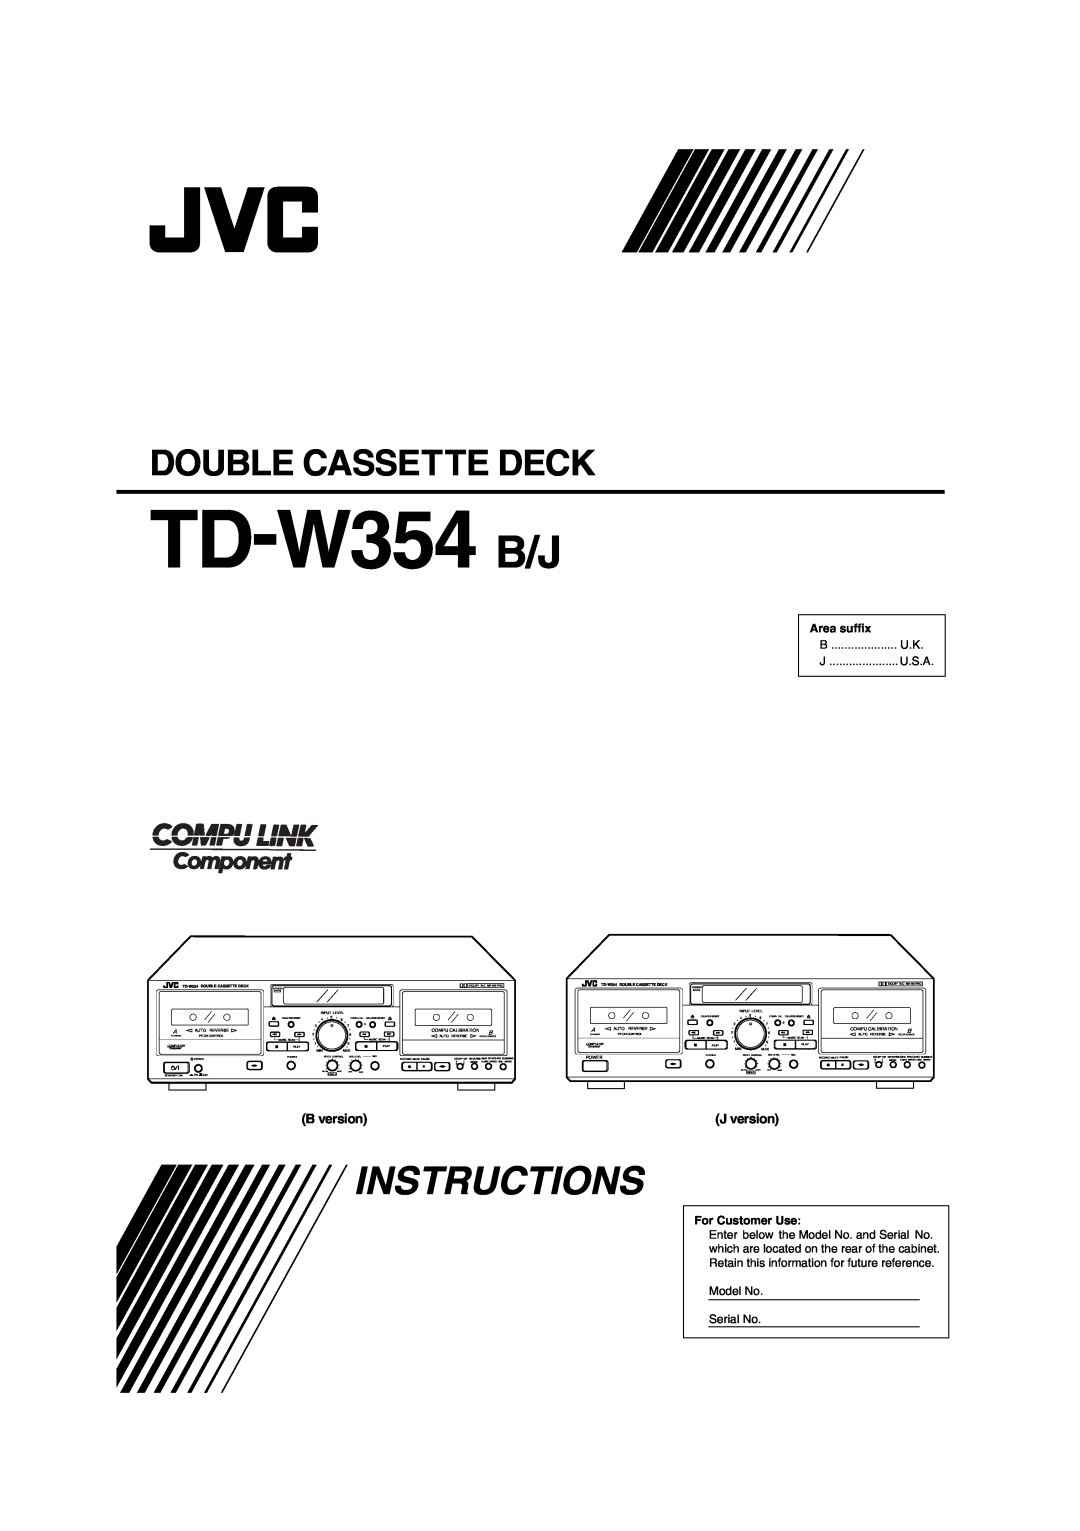 JVC manual TD-W354 B/J, Instructions, Double Cassette Deck, Area suffix, U.S.A, For Customer Use, Model No Serial No 